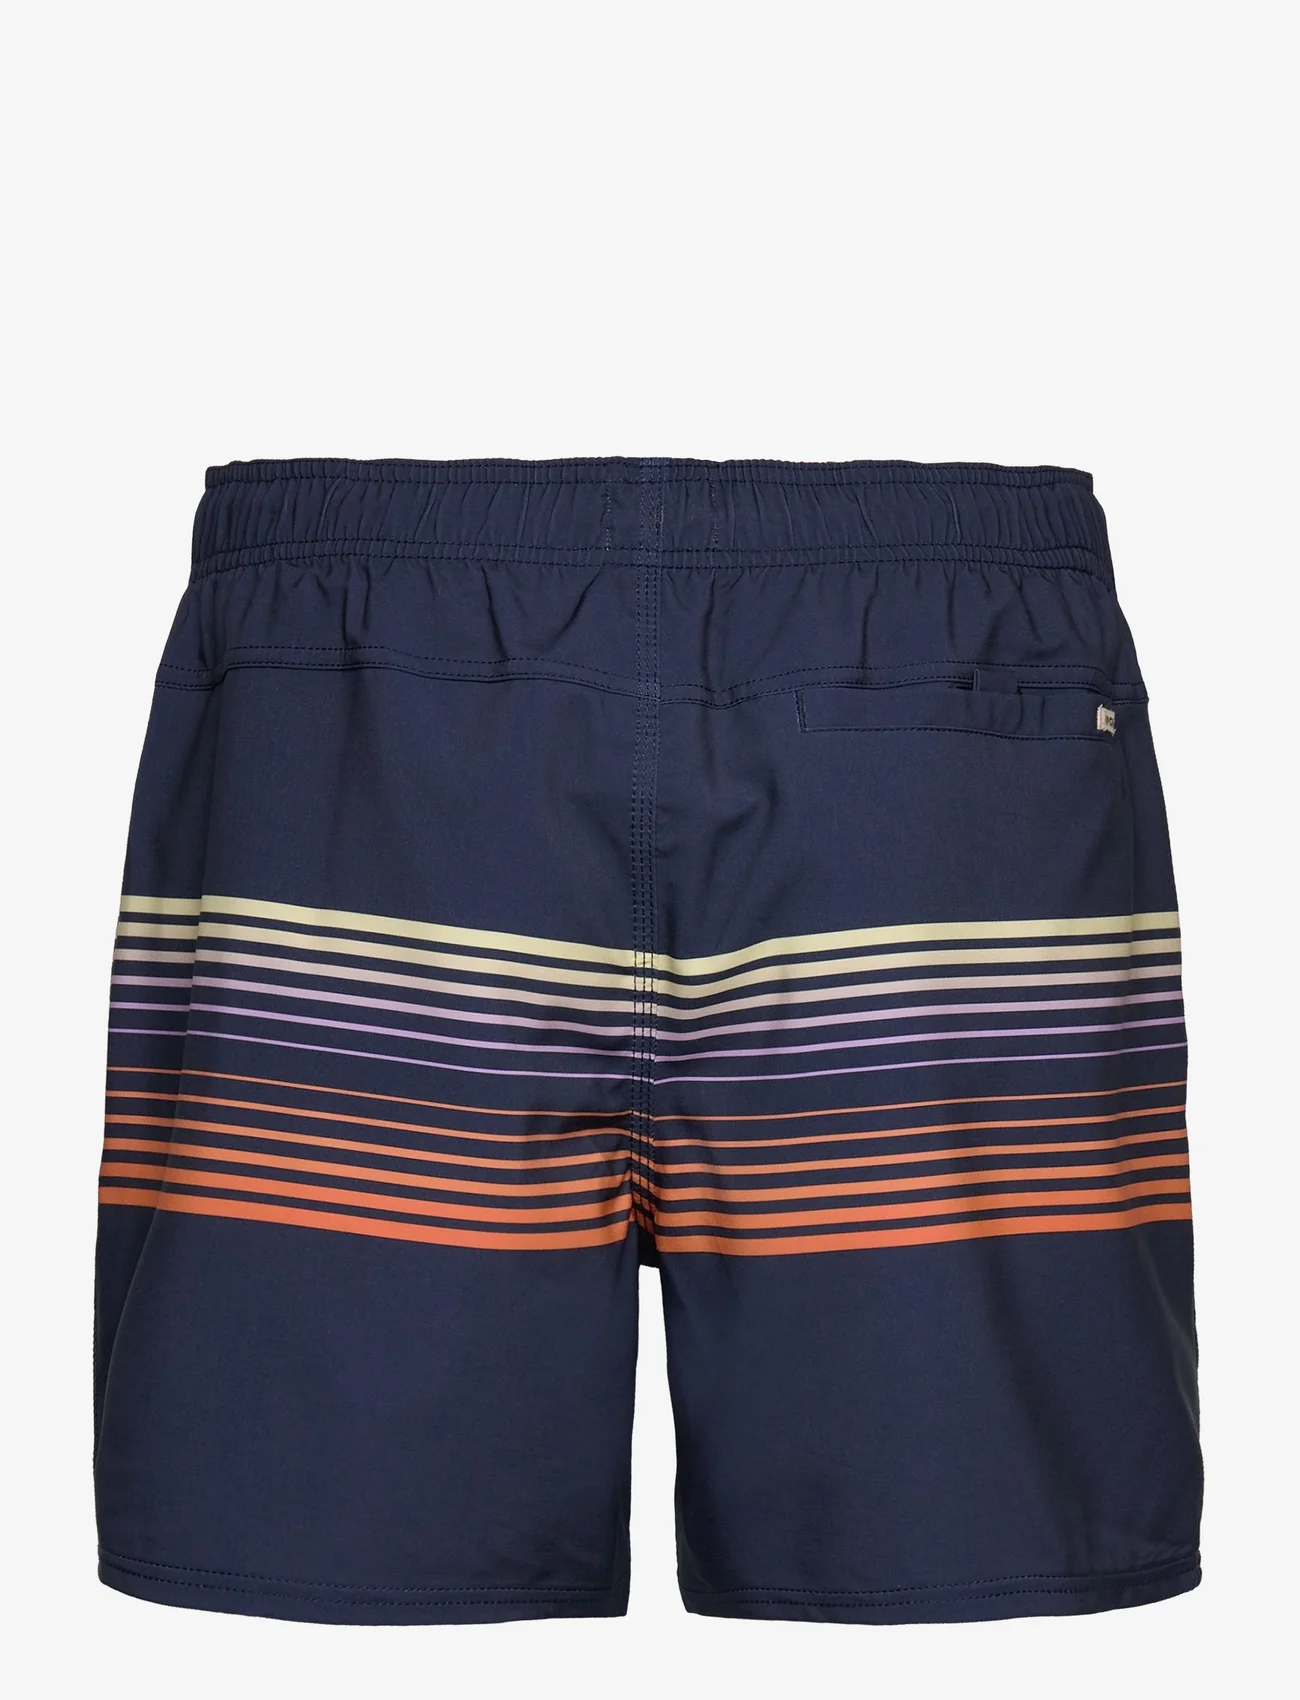 Rip Curl - SURF REVIVAL VOLLEY - szorty kąpielowe - washed navy - 1